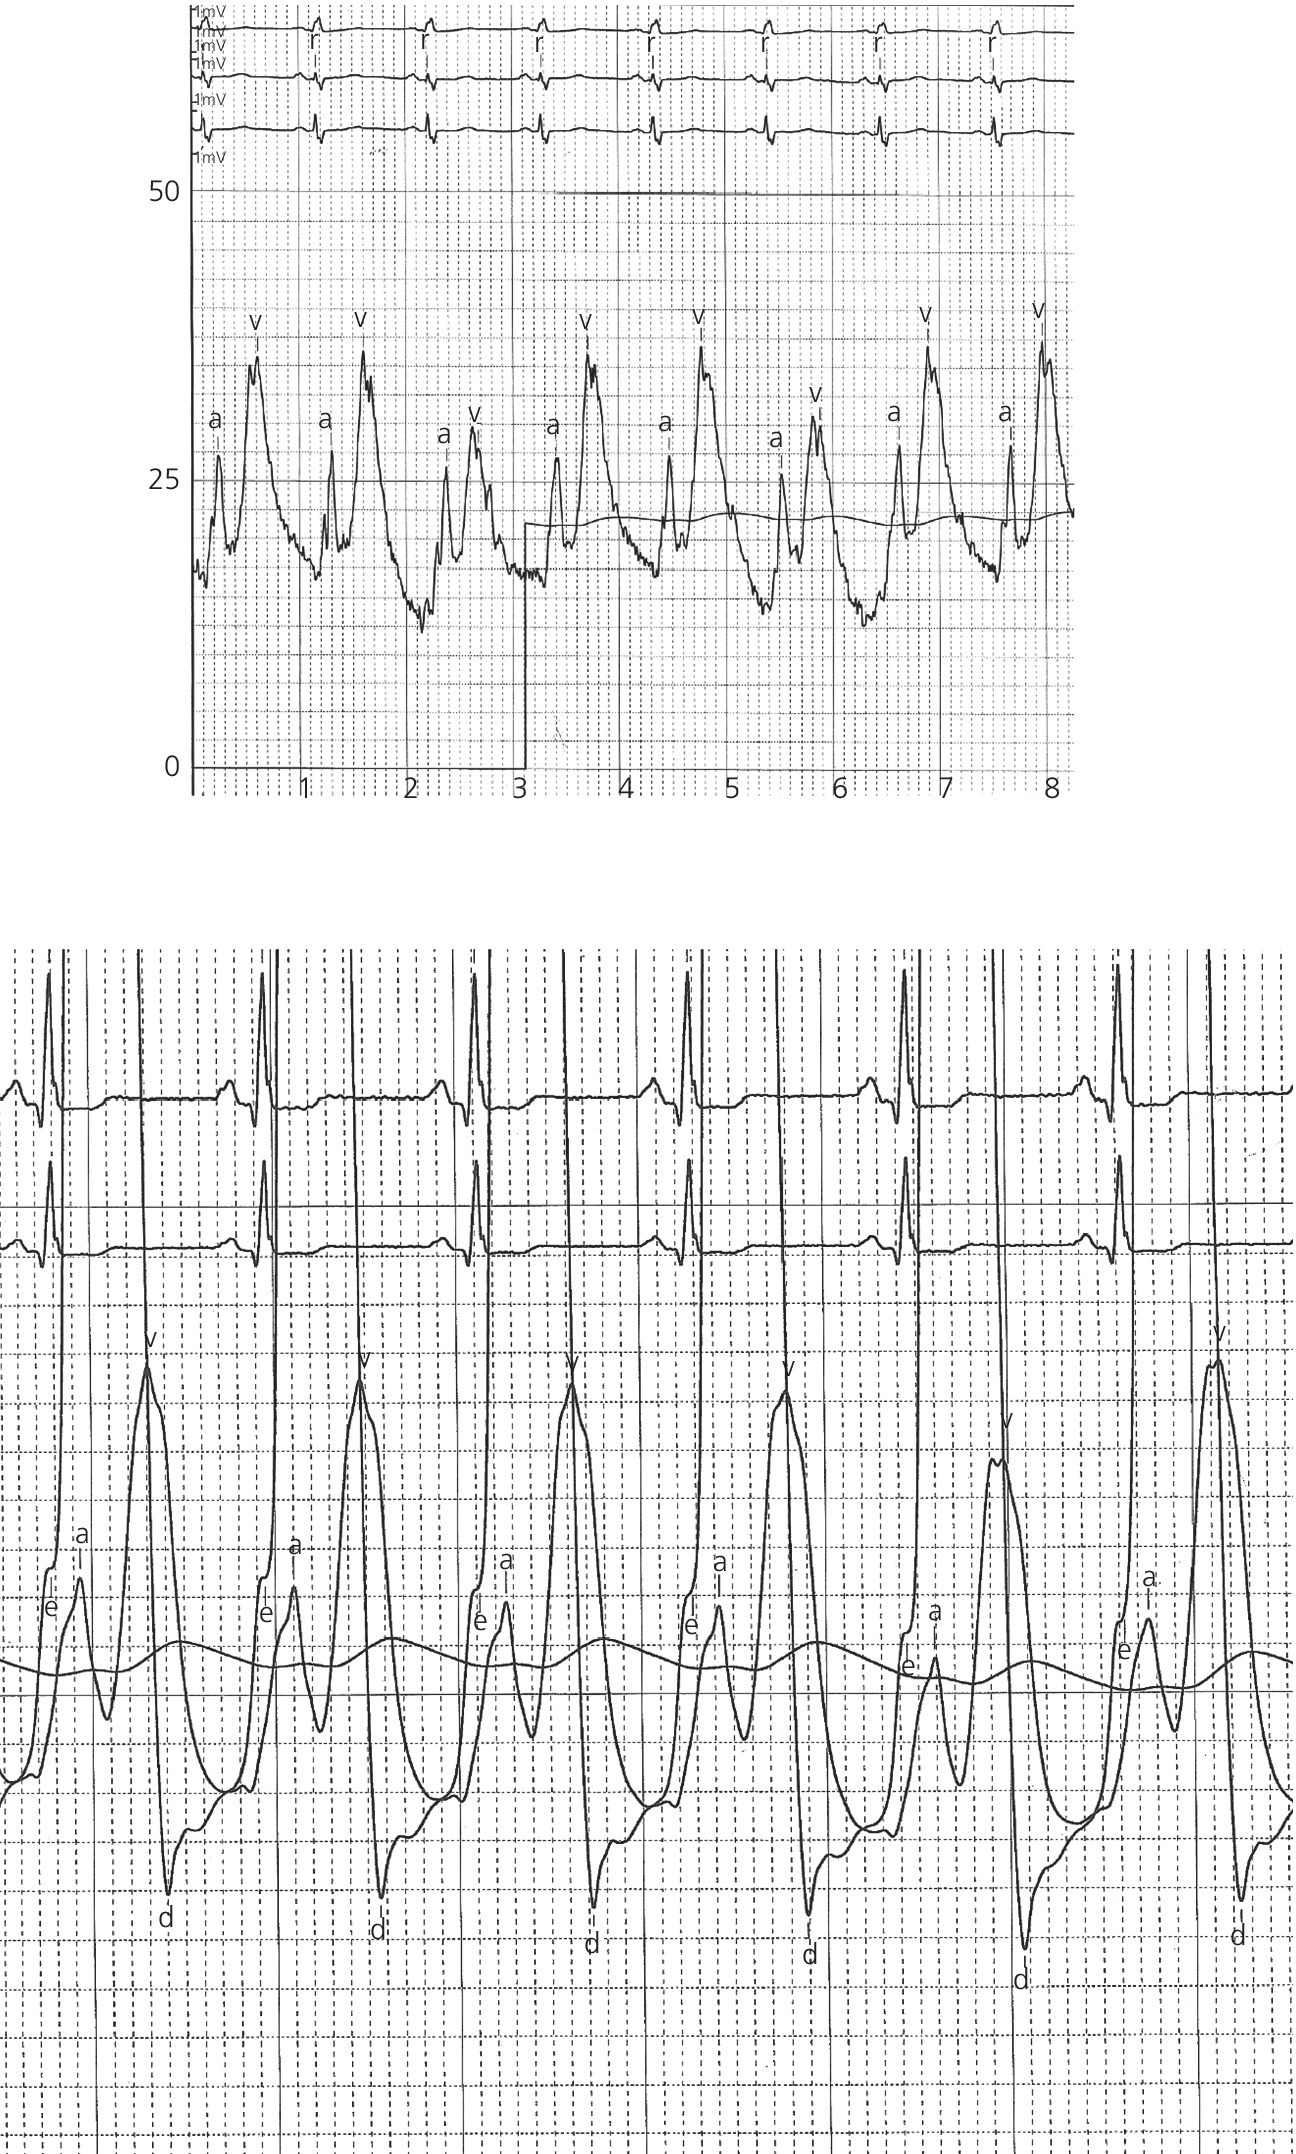 2 ECGs displaying prominent V waves.